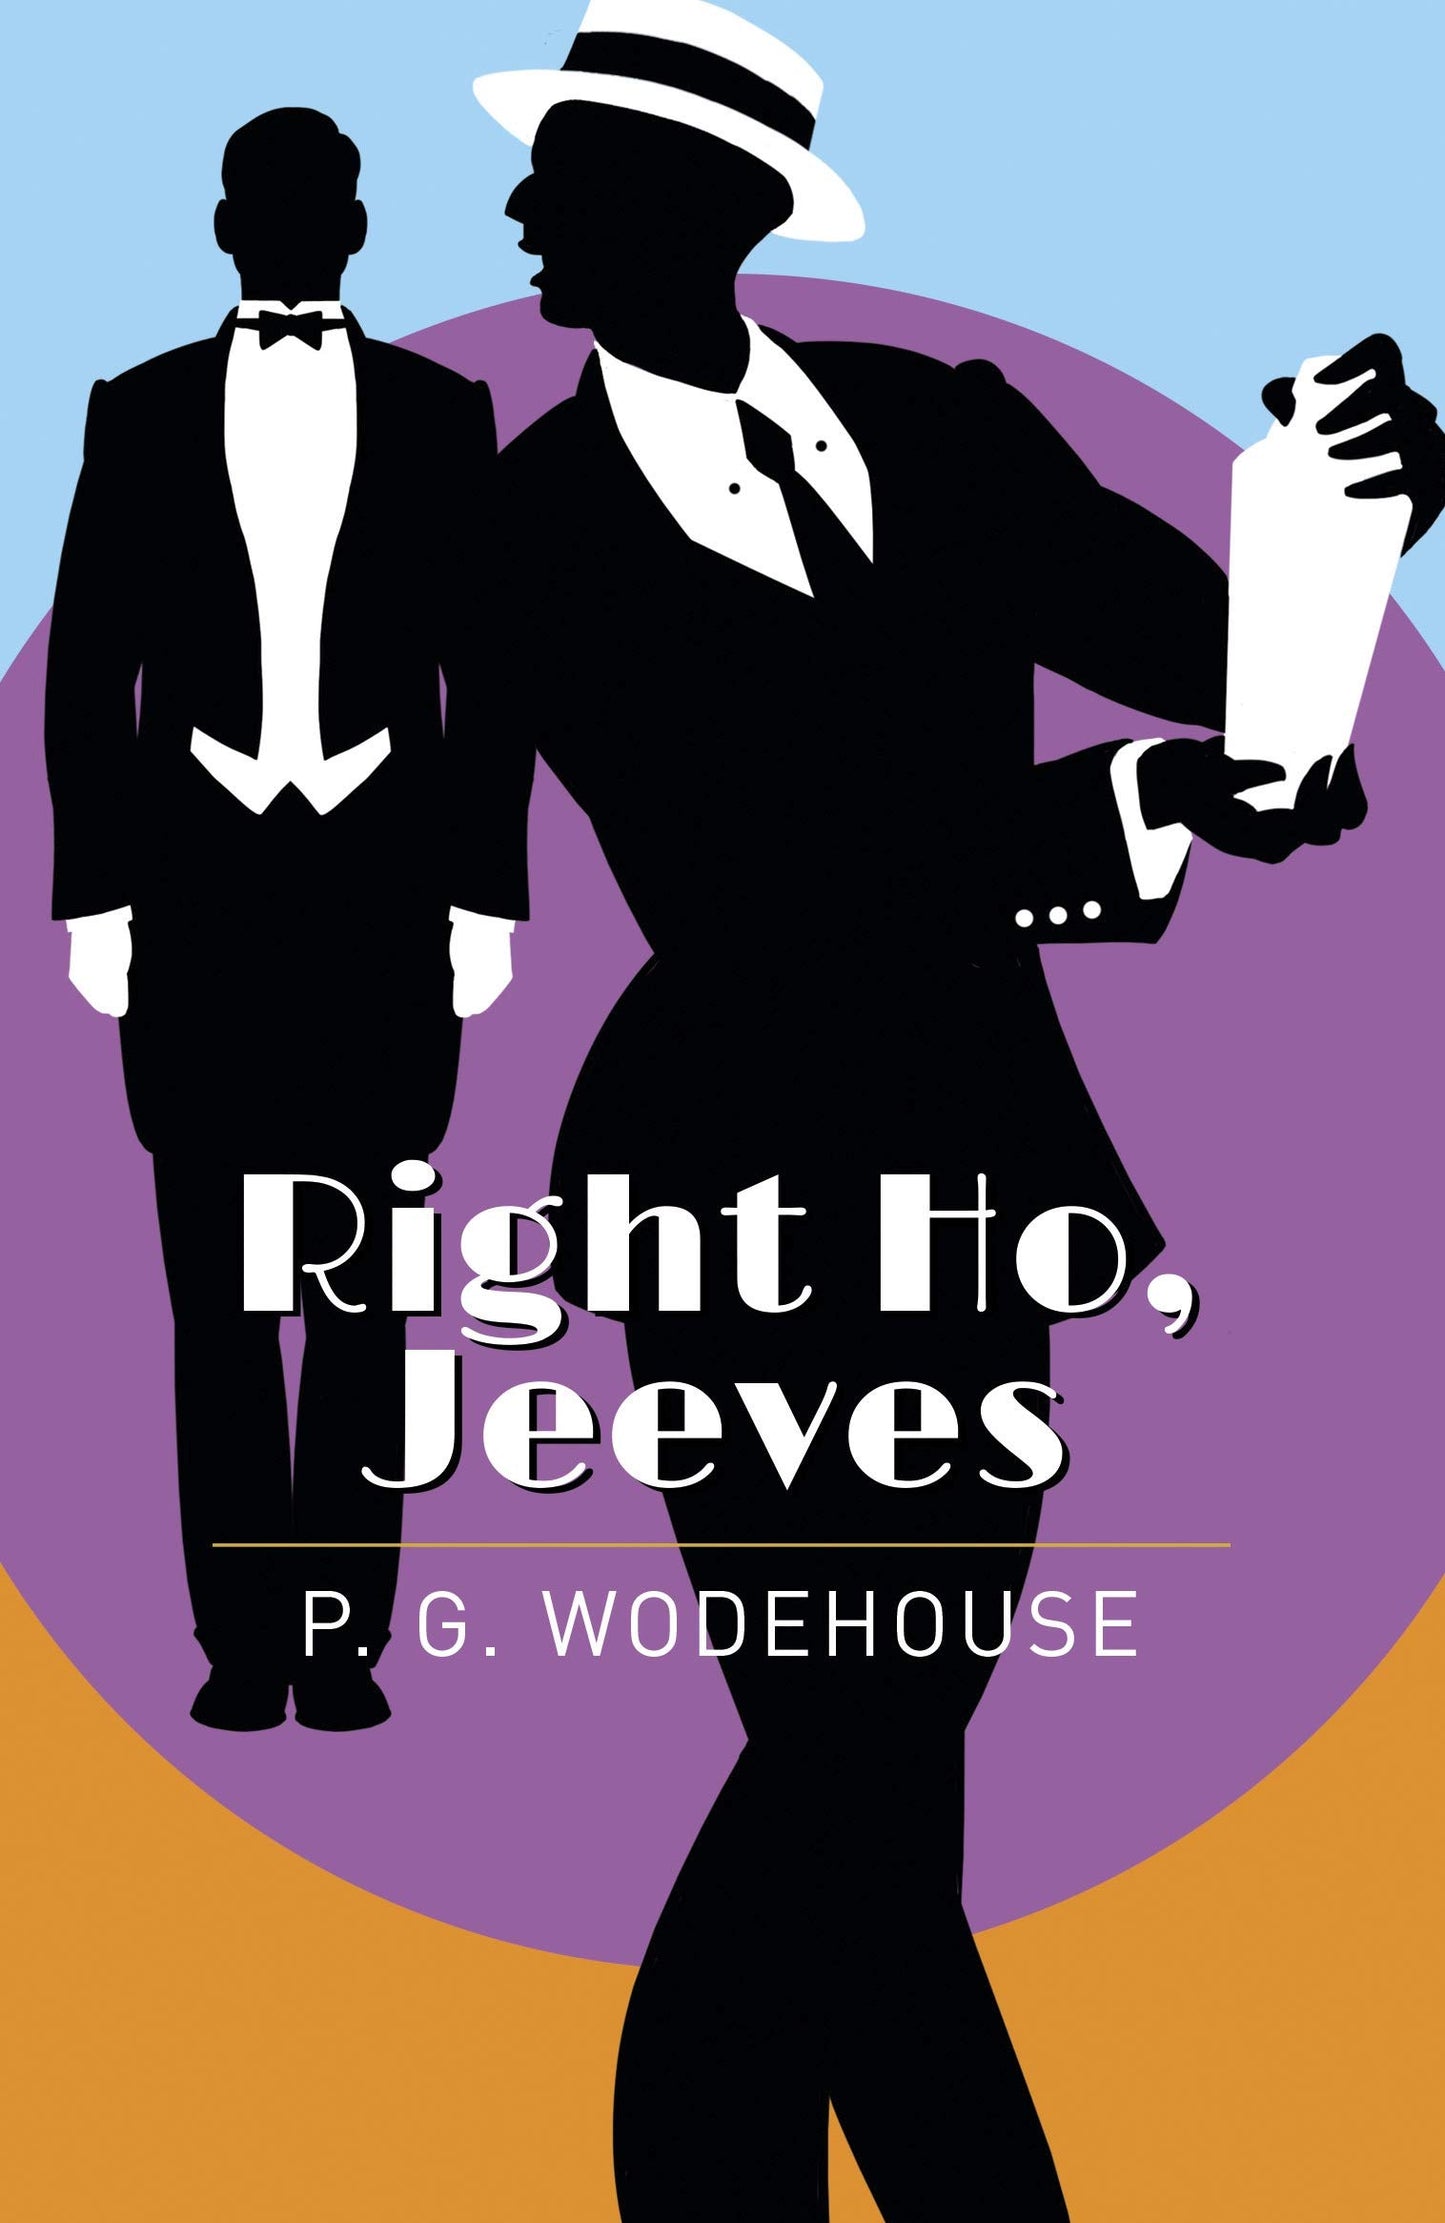 Right Ho Jeeves (Wodehouse - paperback)